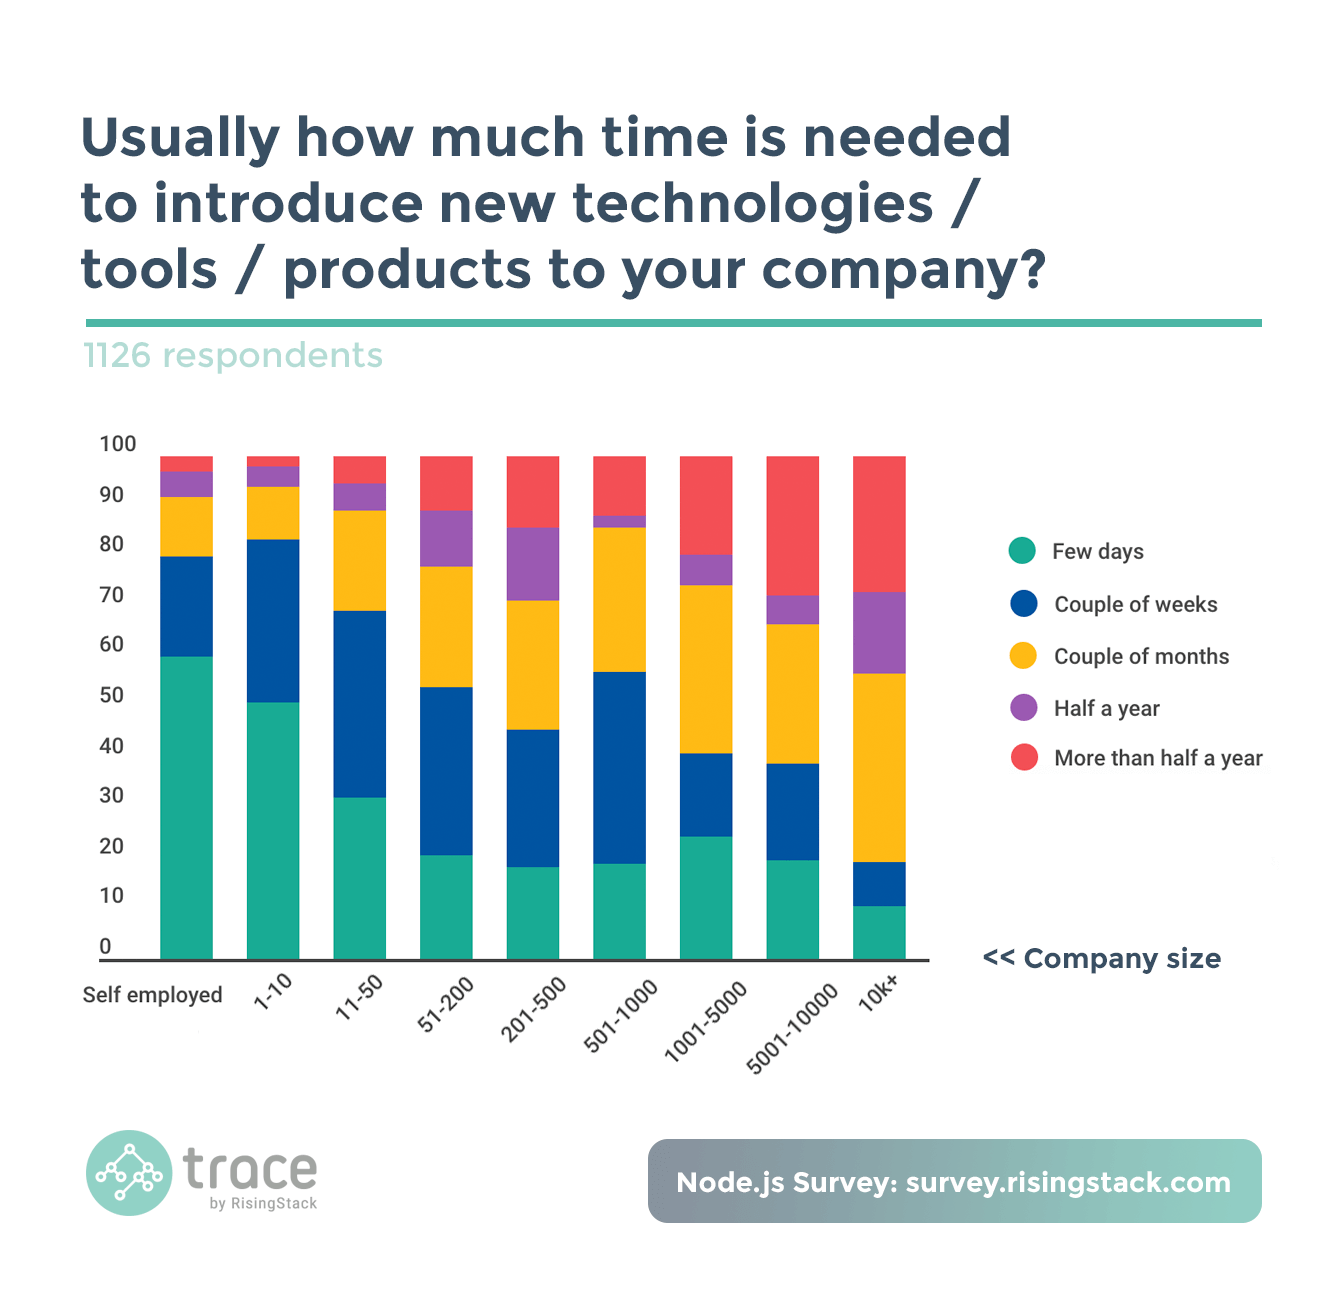 Node.js Survey - How much time is needed to introduce new technologies, tools or products to your company? A few weeks.